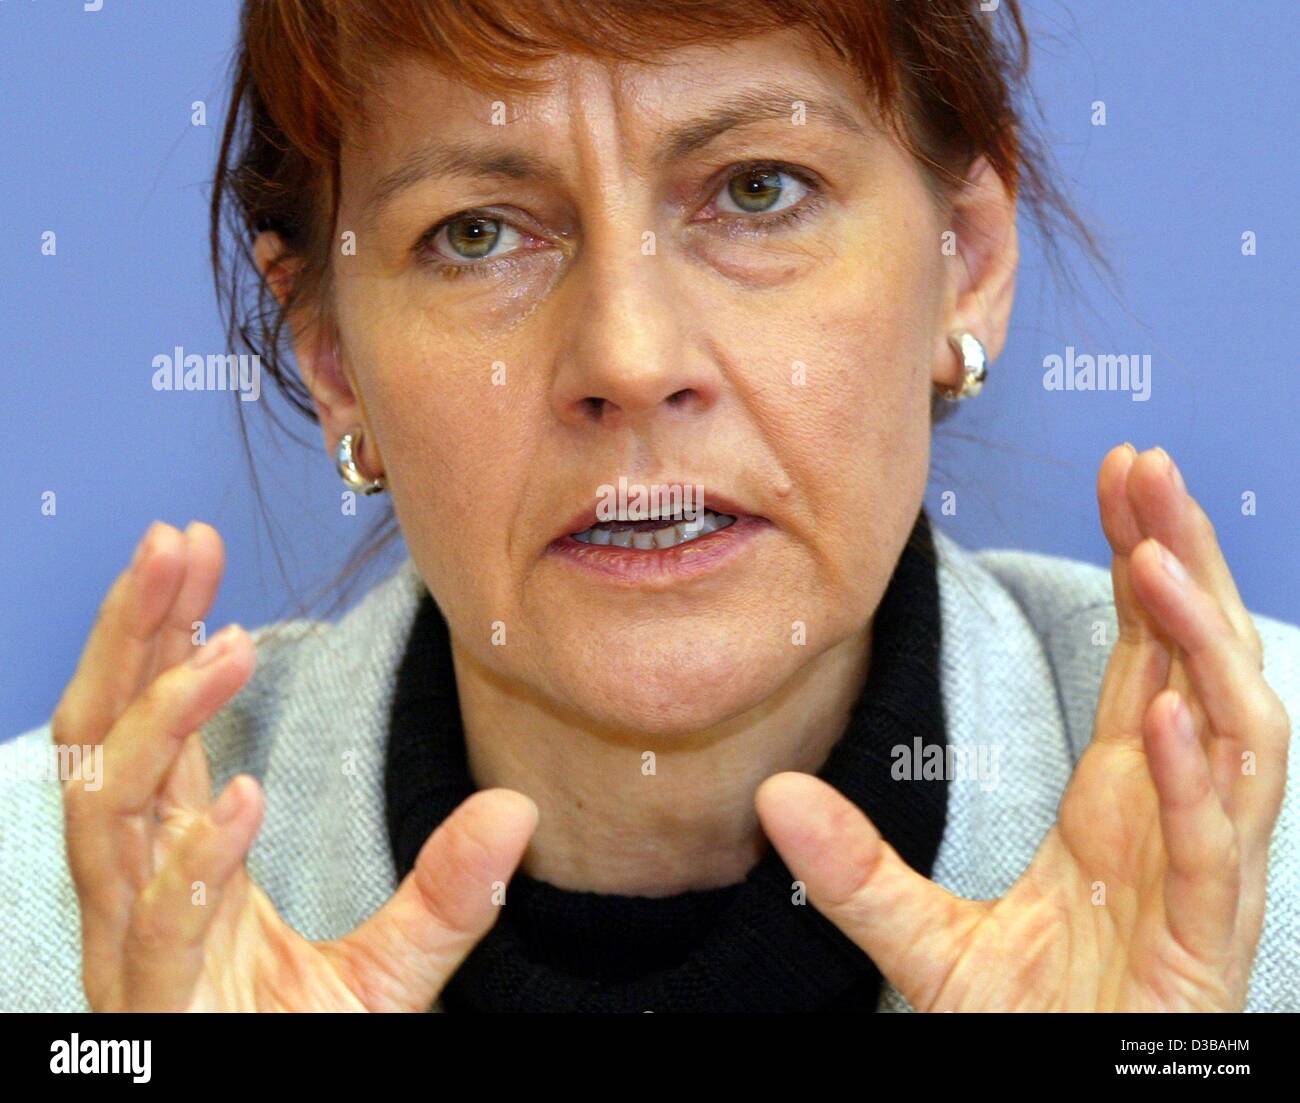 (dpa) - German Education Minister Edelgard Bulmahn of the Social Democratic Party SPD speaks in during a press conference in Berlin, 16 January 2002. Bulmahn has been serving as Education Minister since 1998 and is to continue her work in the new parliamentary term. Stock Photo